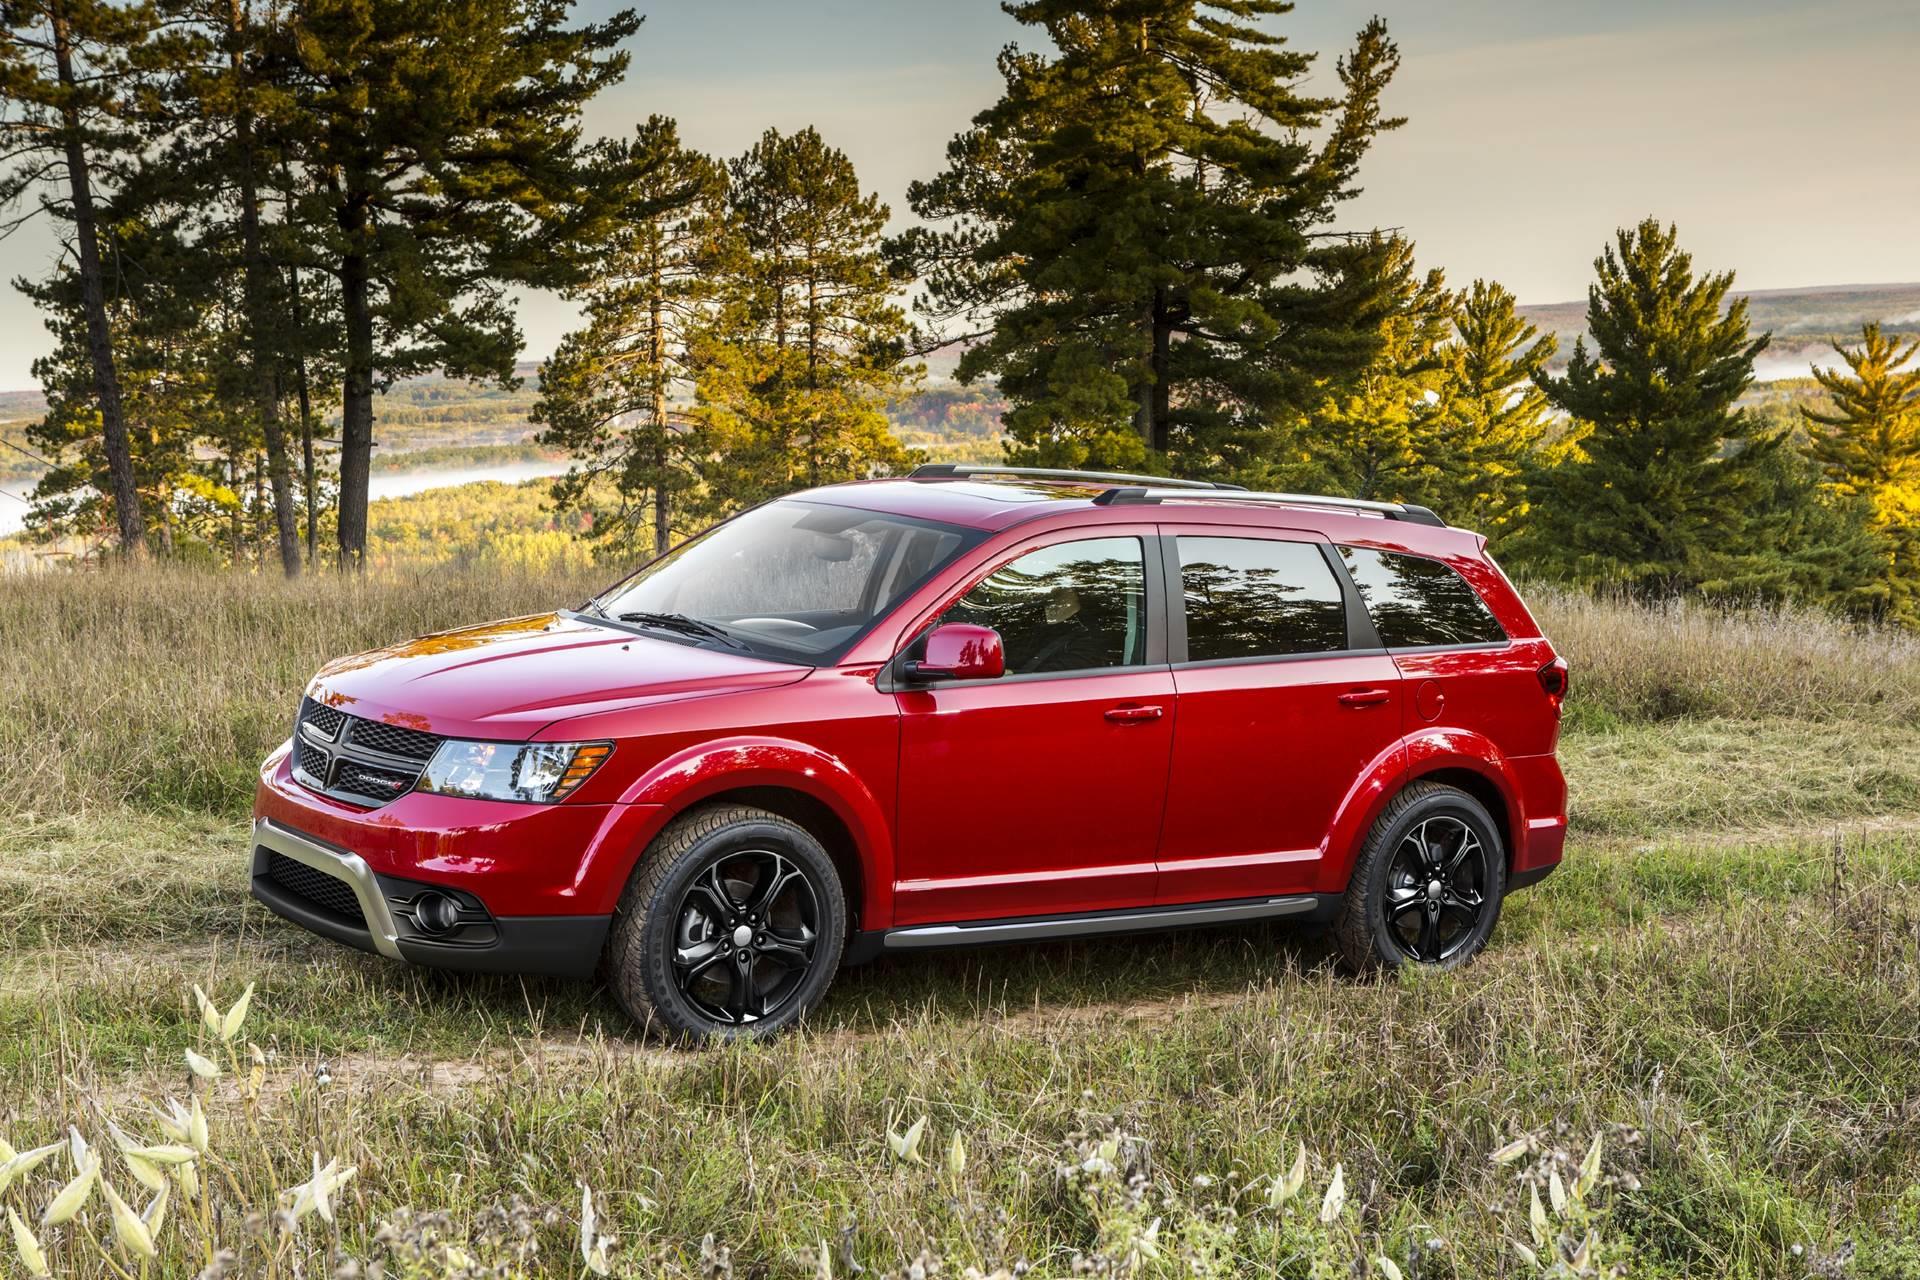 2020 Dodge Journey technical and mechanical specifications